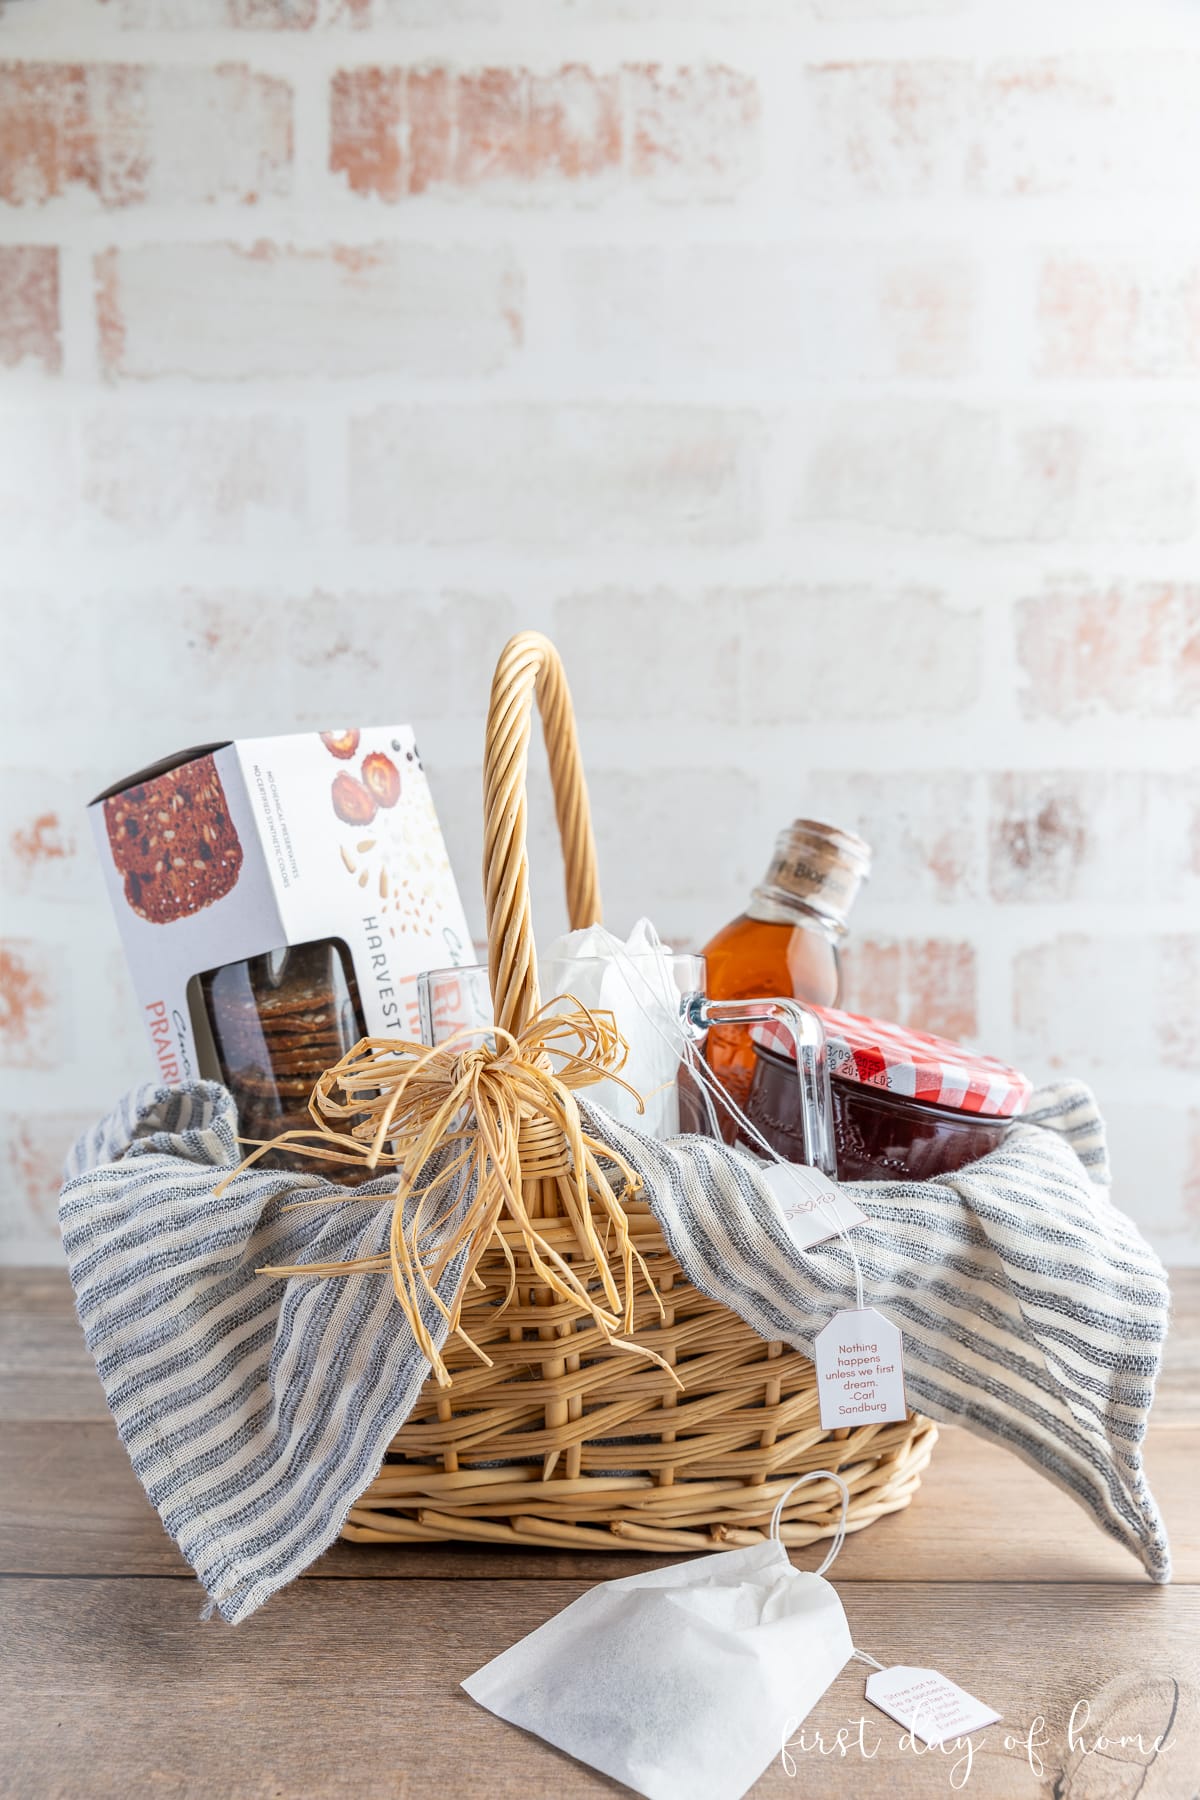 Straw basket filled with fruit preserves, crackers, honey, and homemade herbal tea using dried herbs.